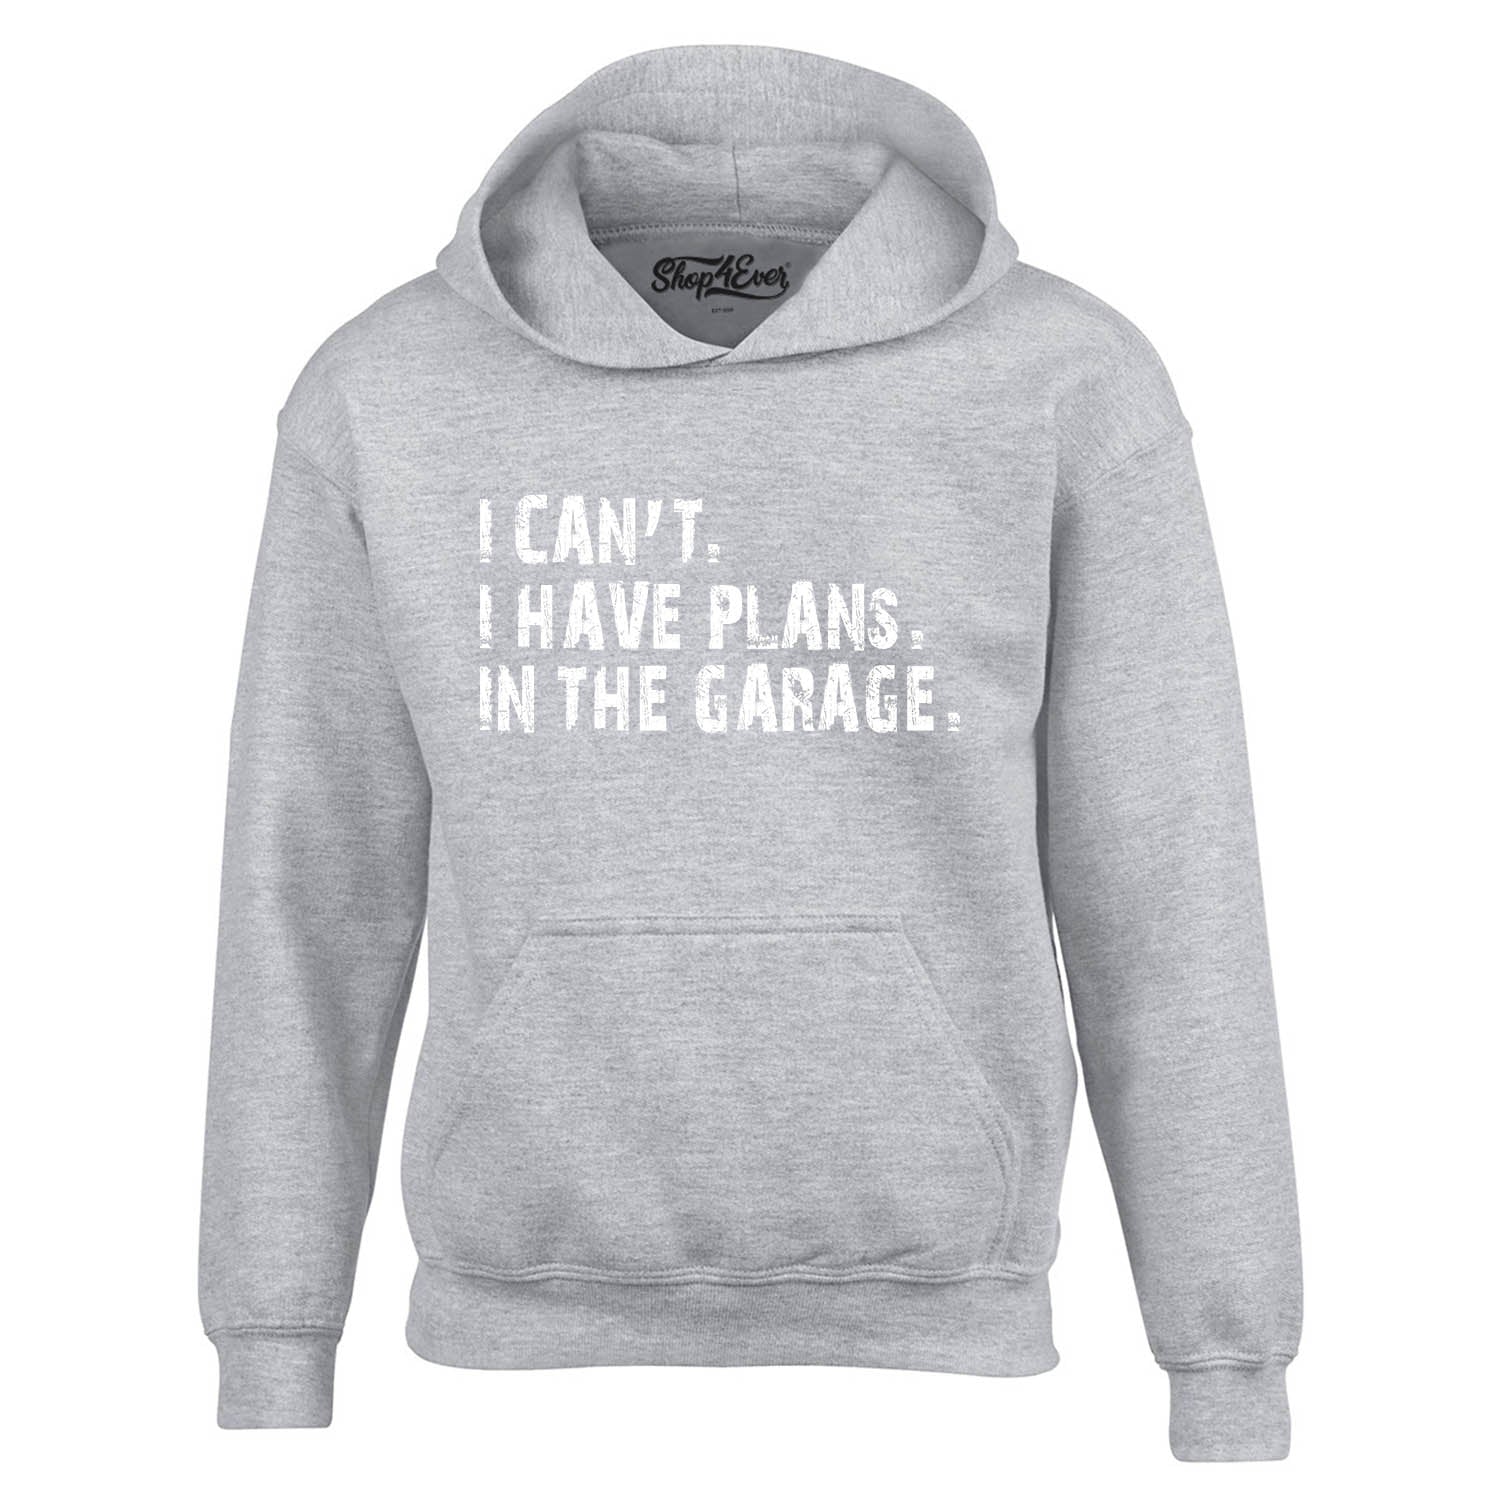 I Can't I Have Plans in the Garage Hoodie Sweatshirts